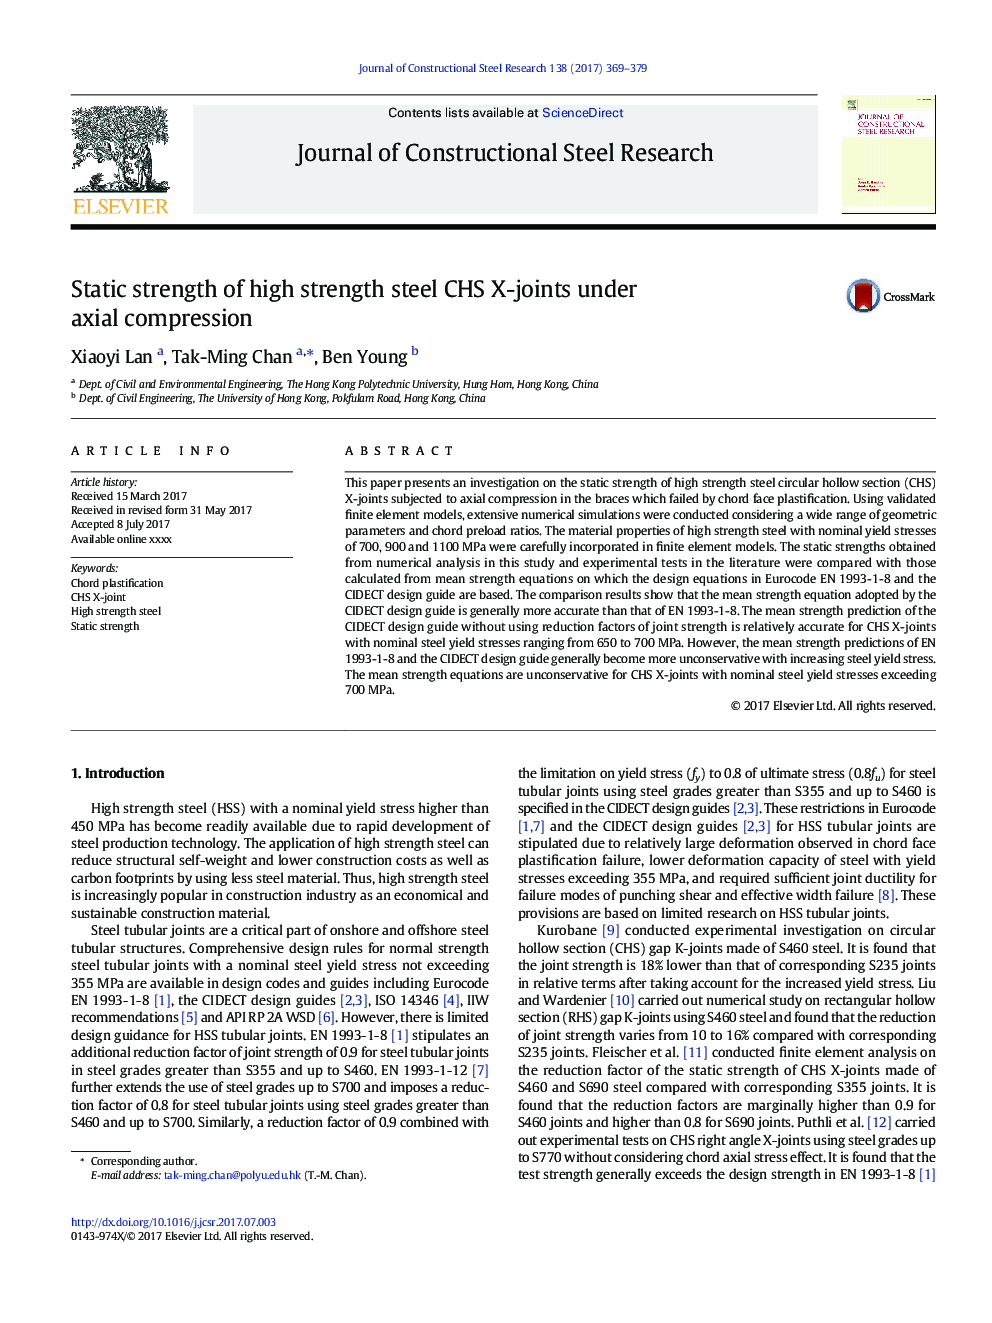 Static strength of high strength steel CHS X-joints under axial compression